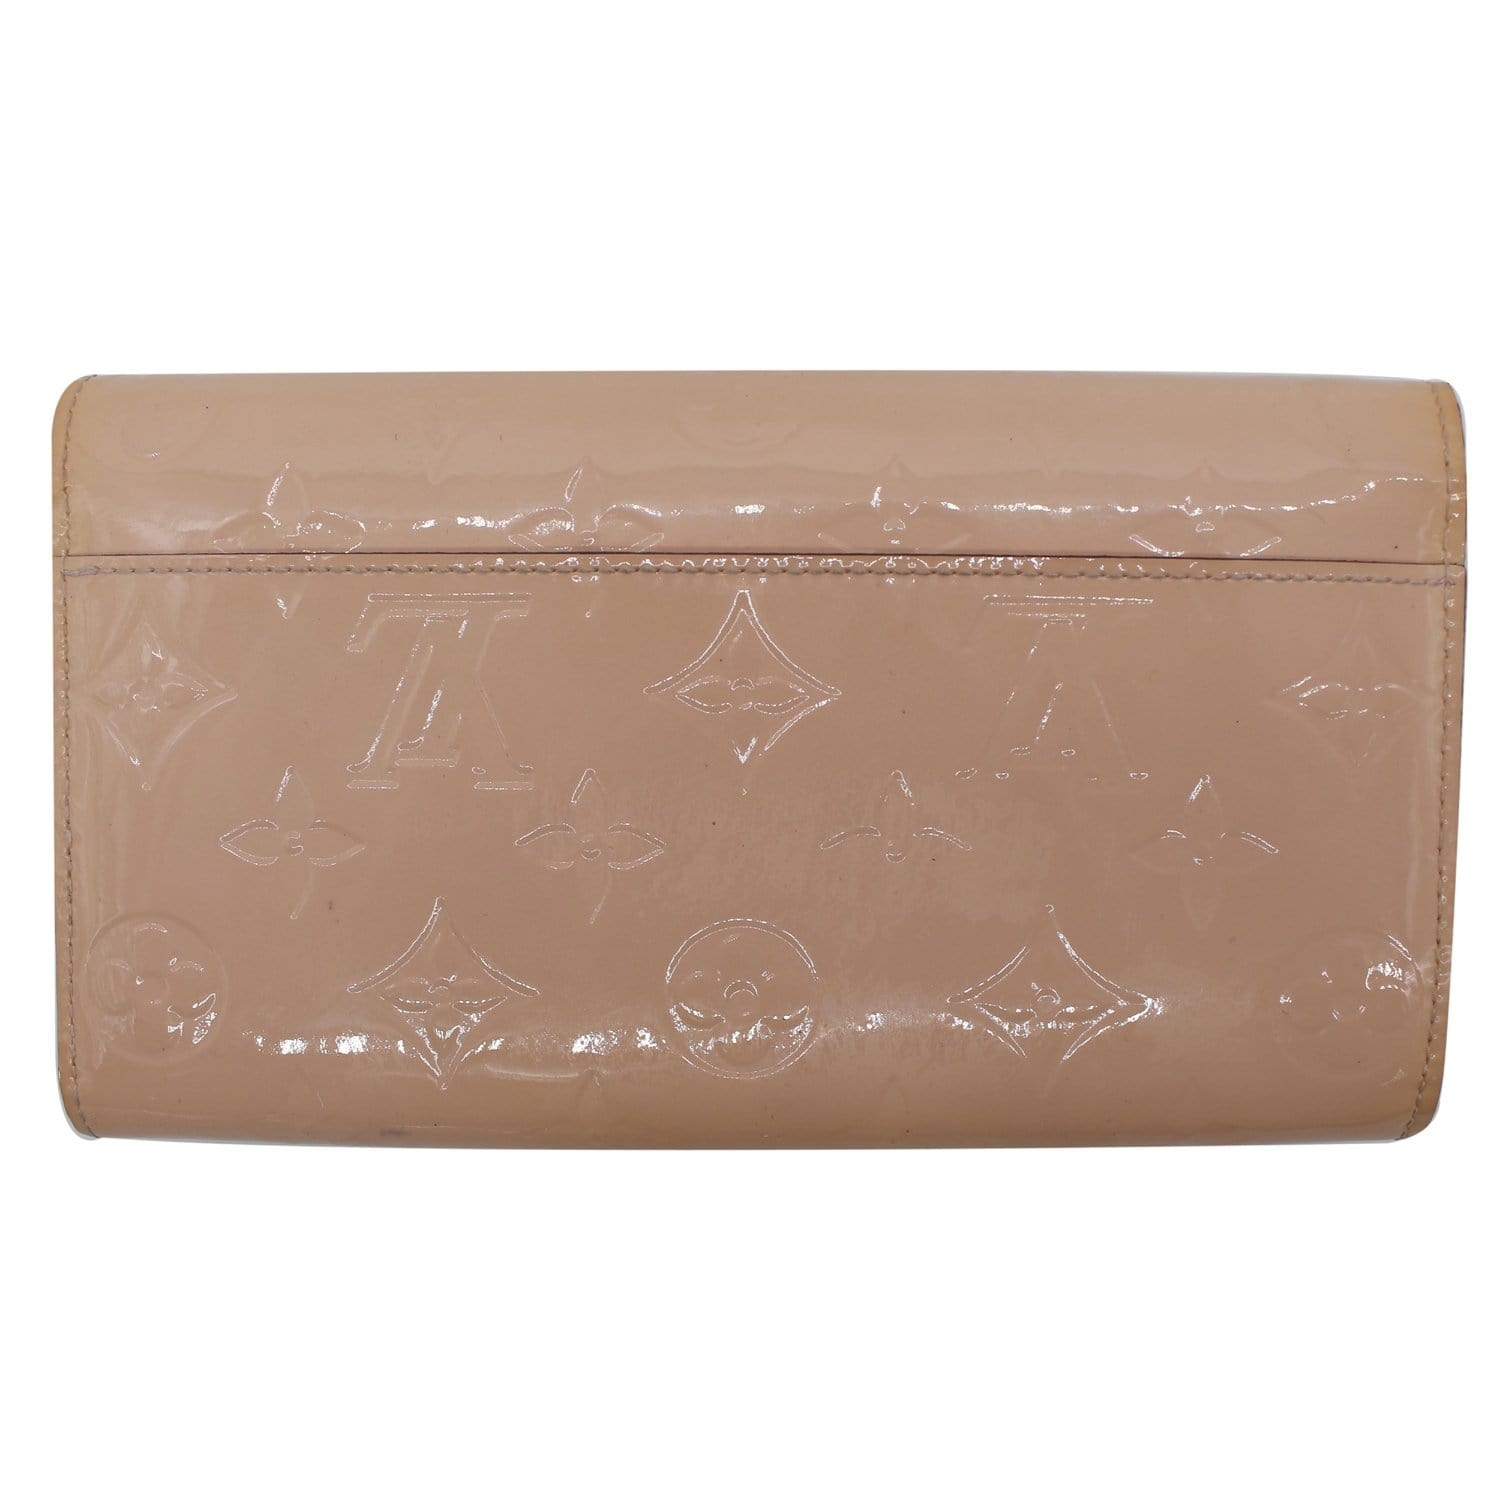 Labels Luxury Consignment - The highly coveted Louis Vuitton monogram  “Sarah” envelope wallet in like new condition! $488 #lv #louisvuitton  #sarah #wallet #accessory #fashion #designer #consignment #monogram